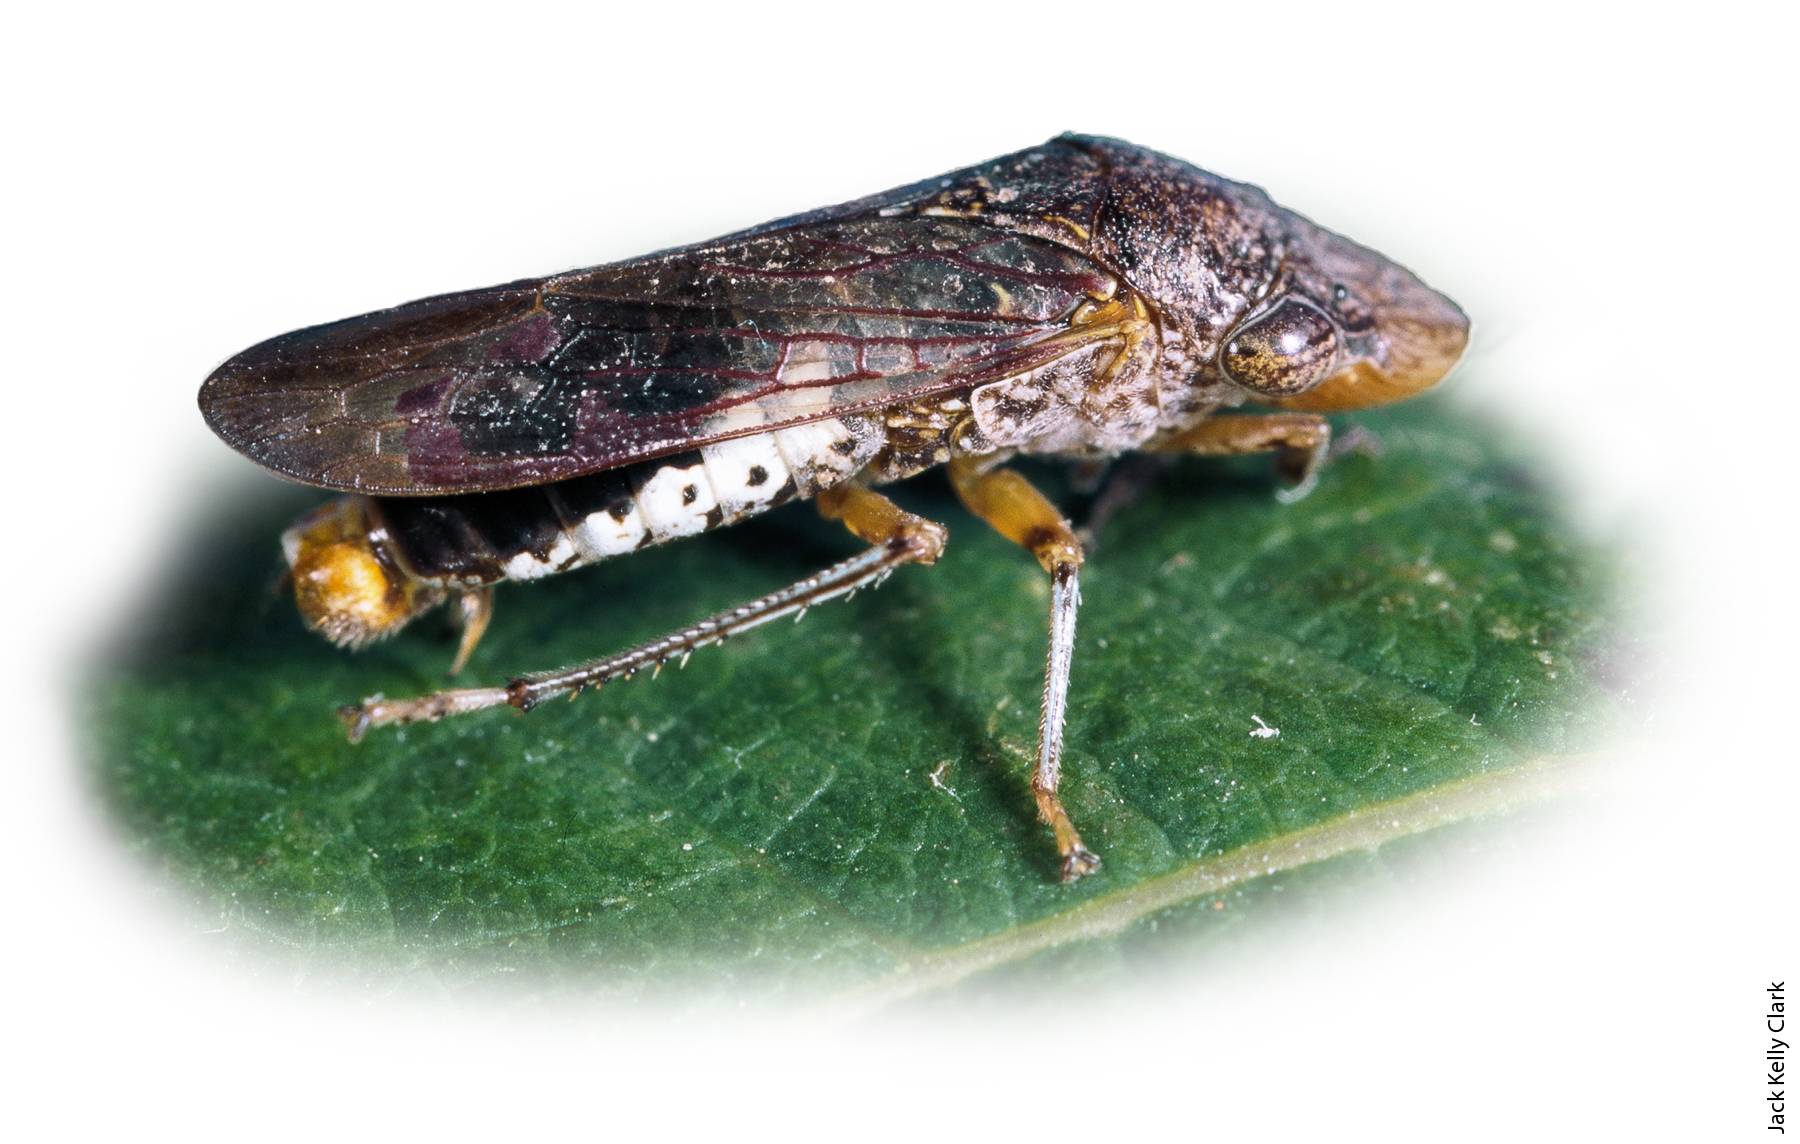 Transcriptome and population structure of glassy-winged sharpshooters (Homalodisca vitripennis) with varying insecticide resistance in southern California.